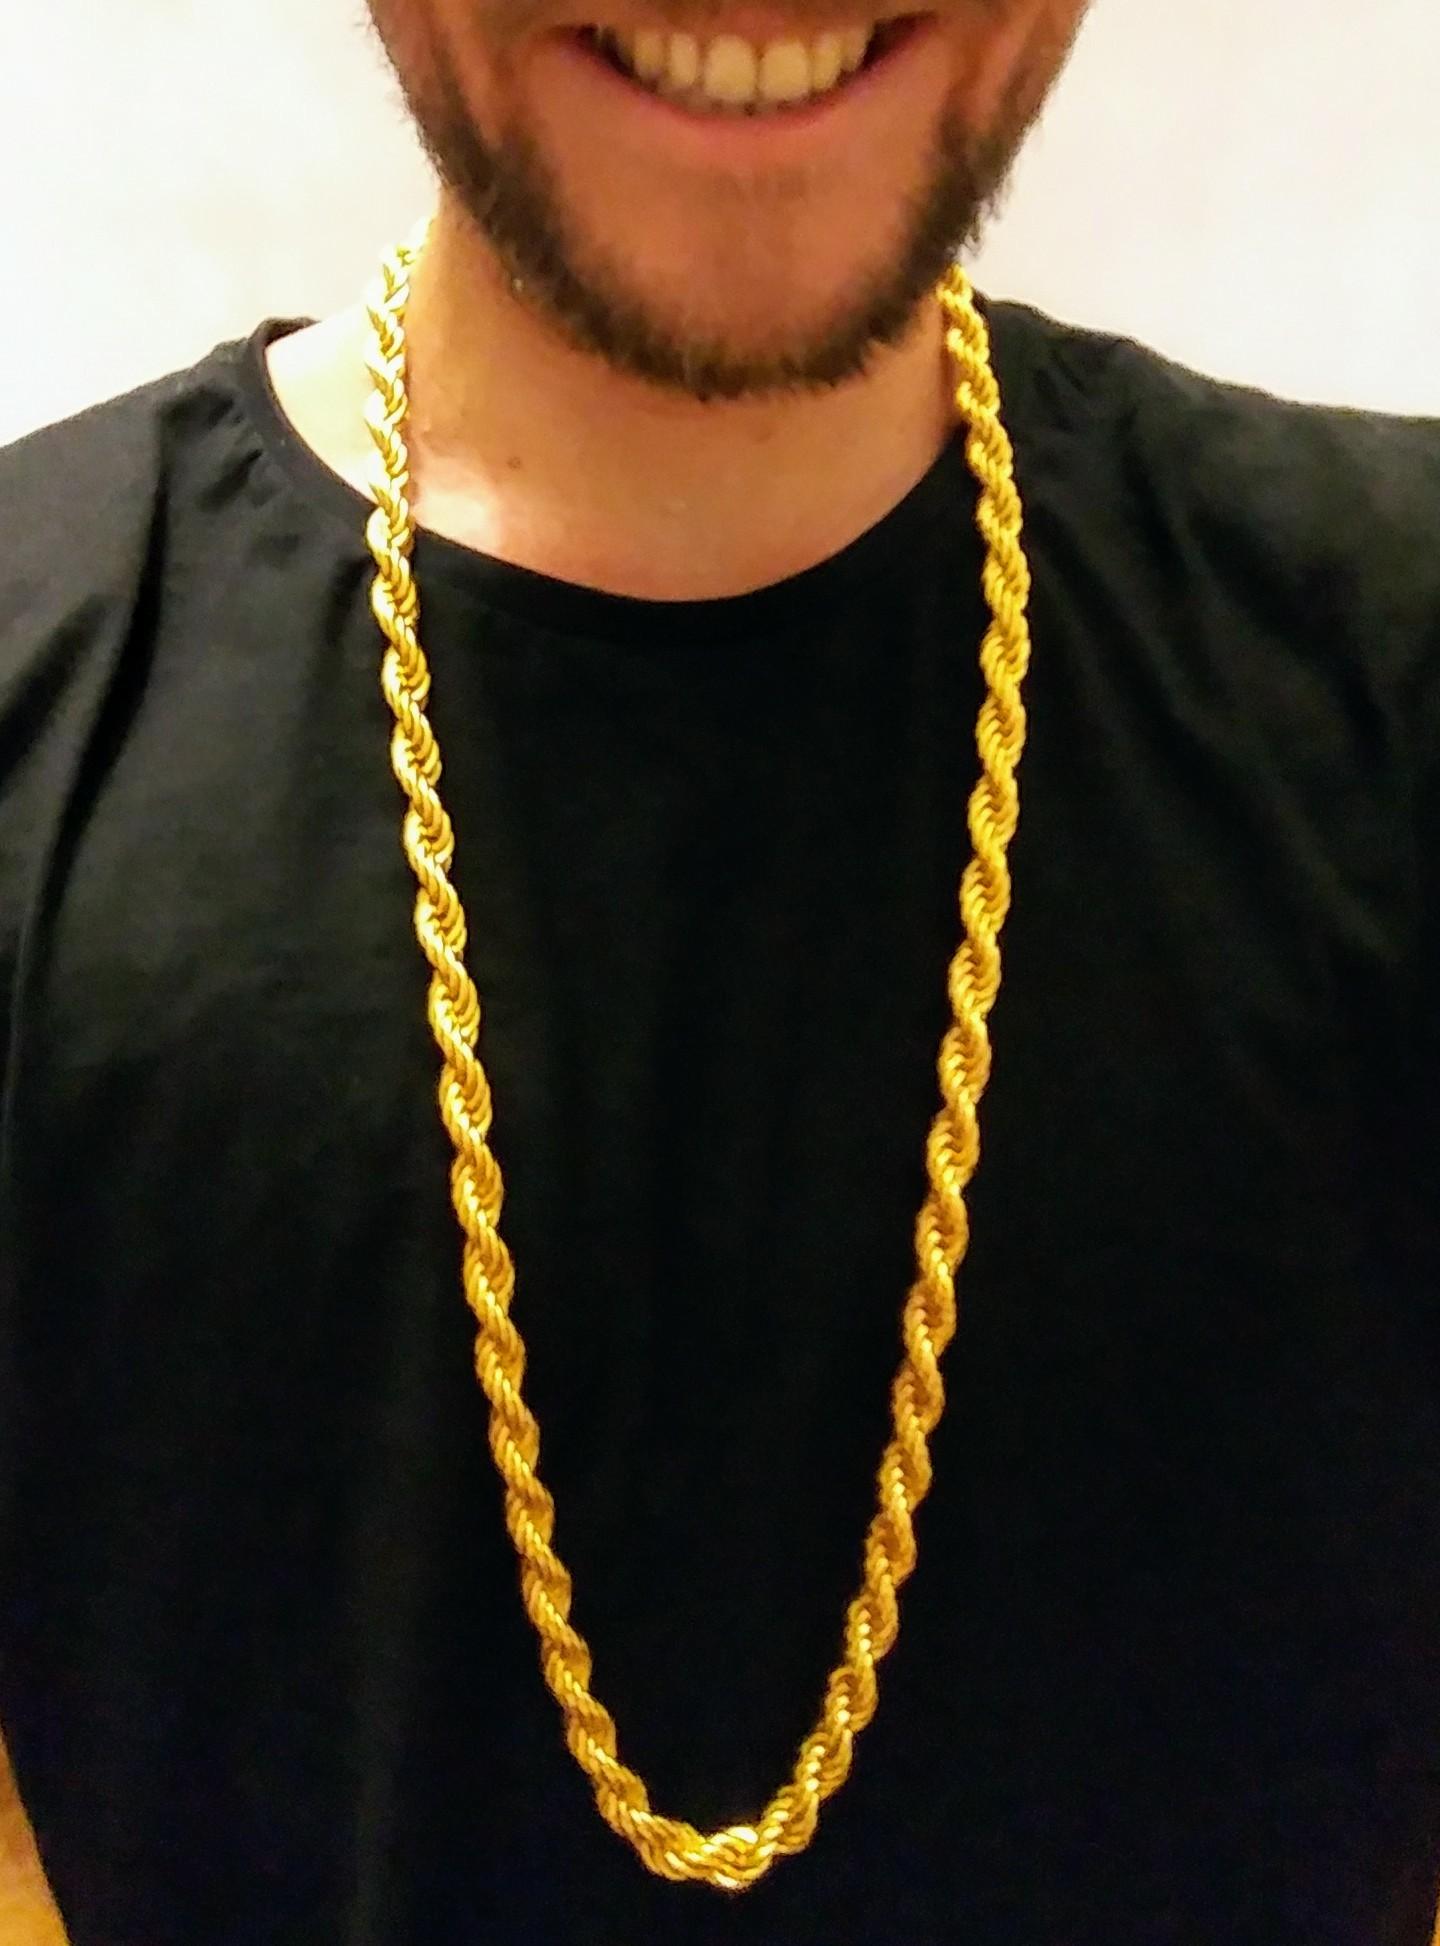 Massive hip hop goldkette rope chain 80s in 80798 München for €35.00 ...